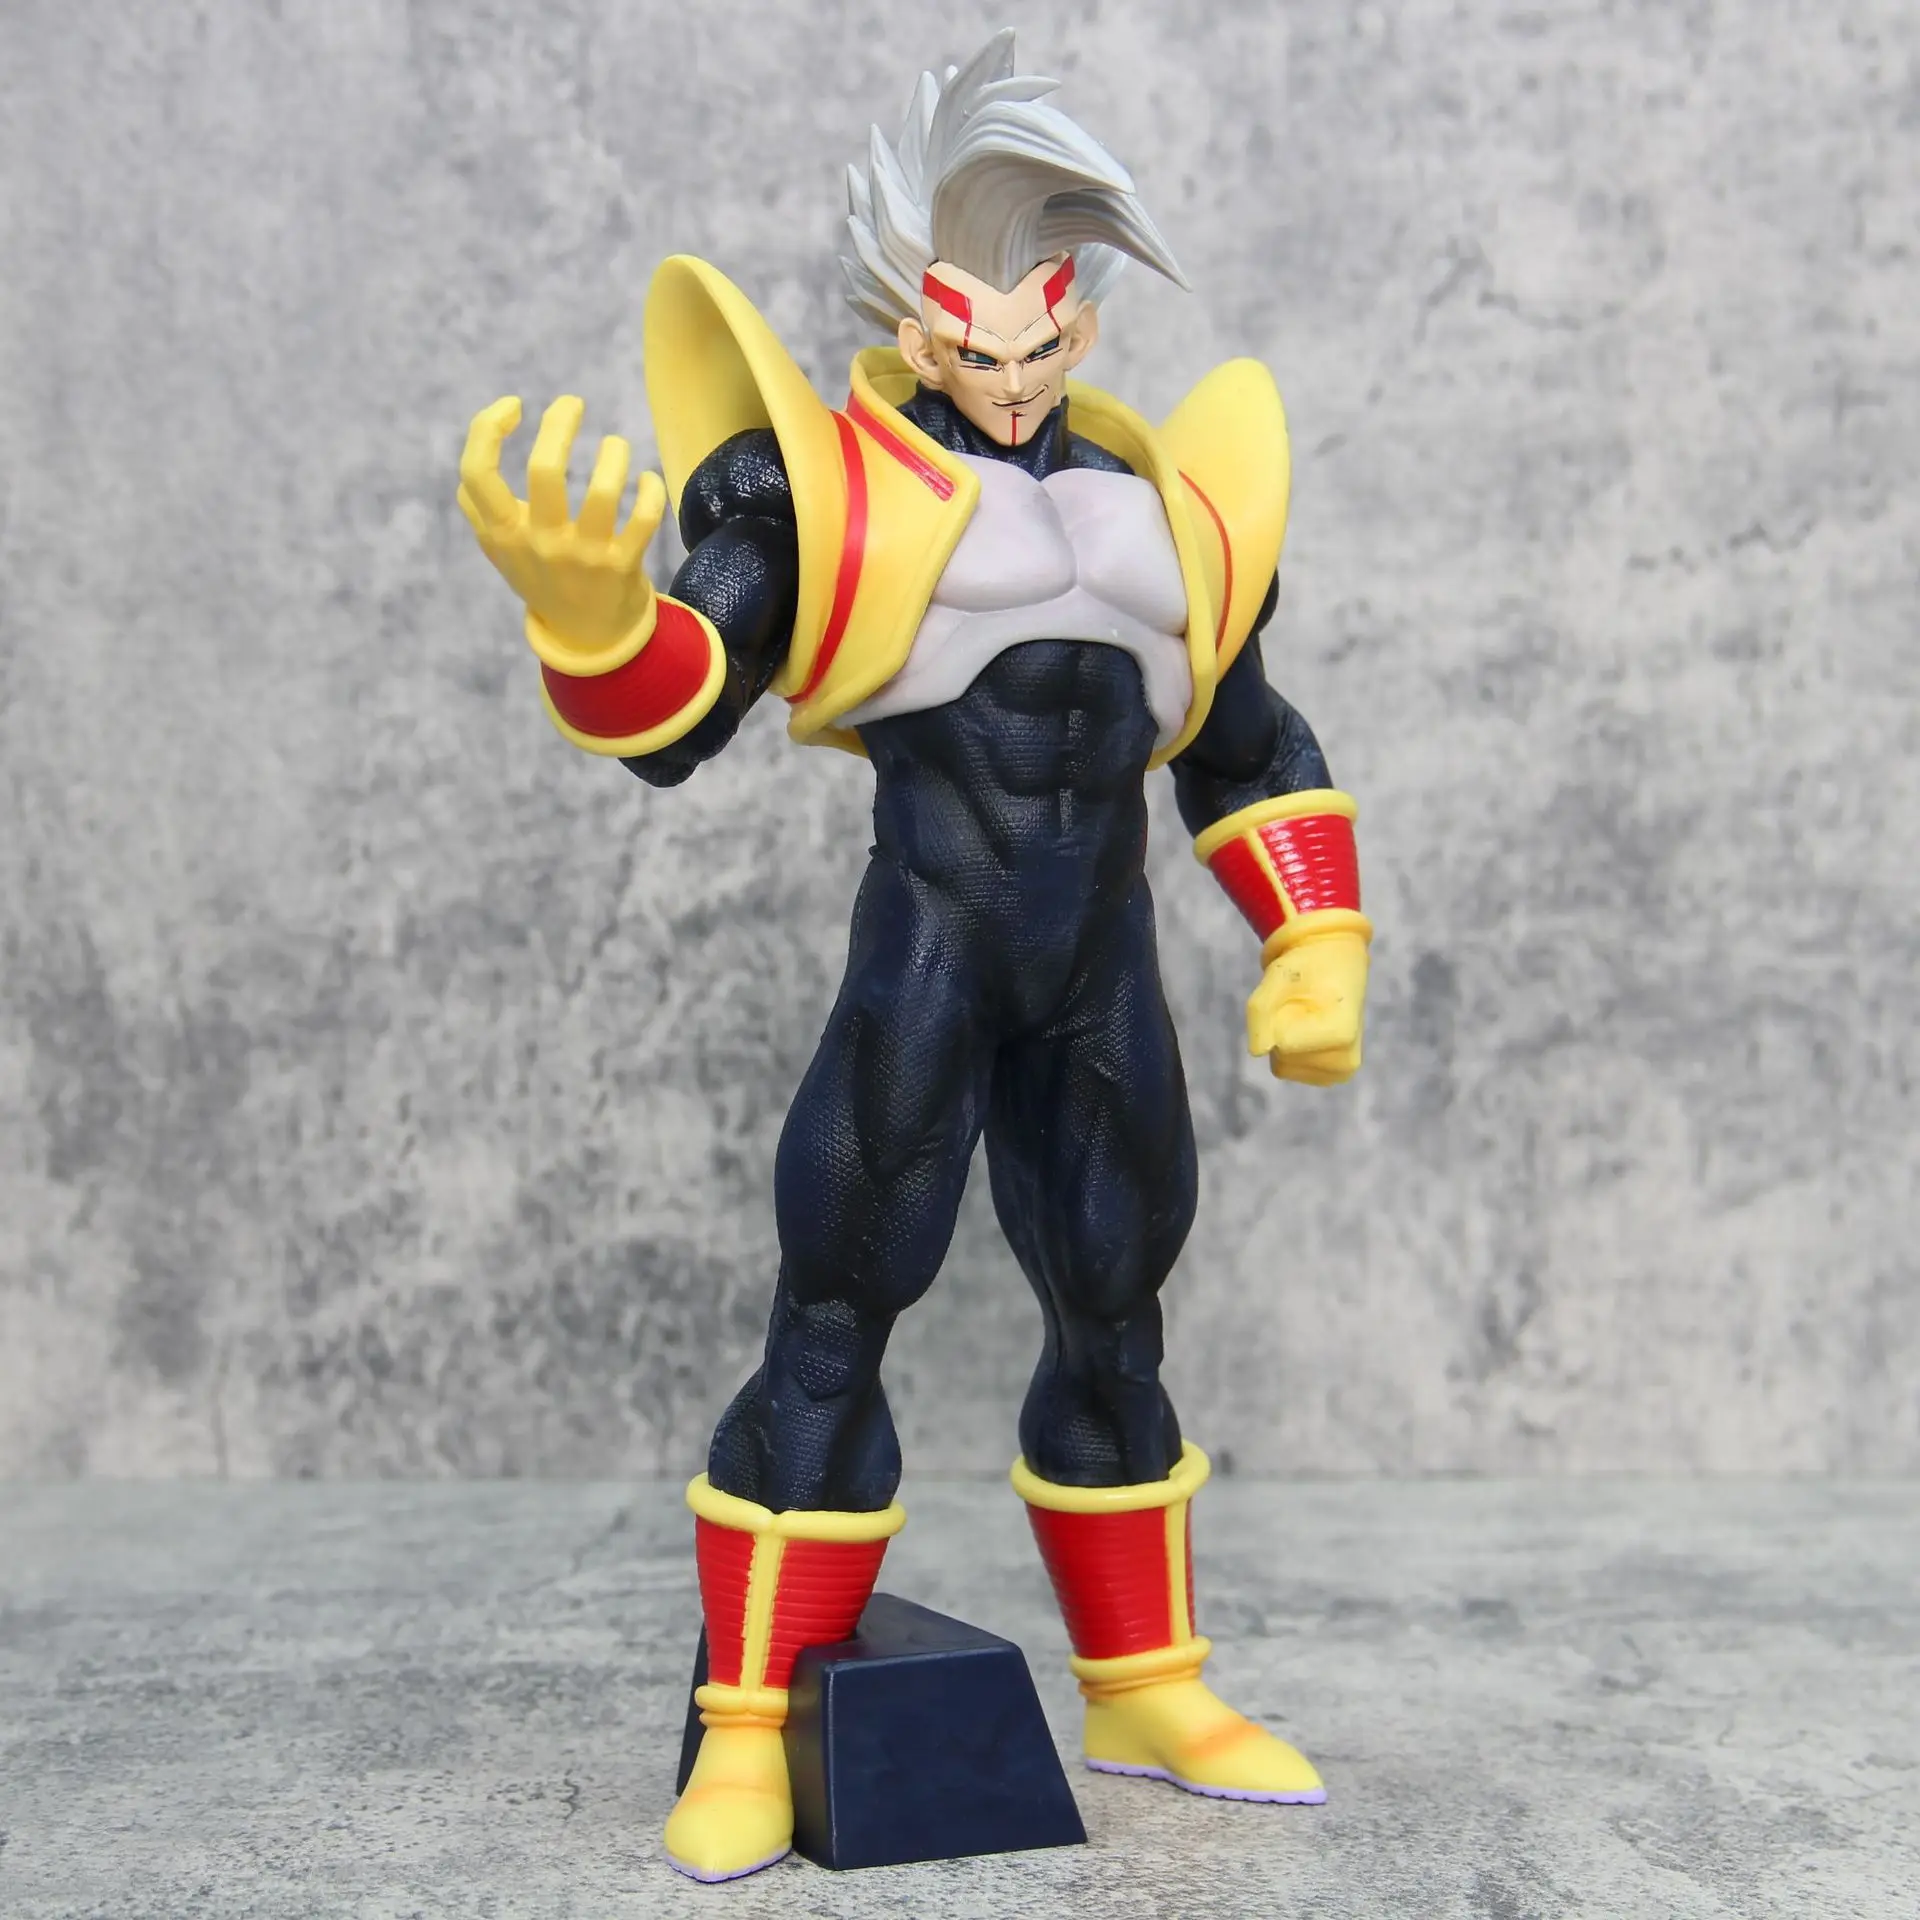 28cm Dragon Ball GT Baby Vegeta Figure GK Statue Pvc Action Figures  Collectible Model Toys for Children Gifts